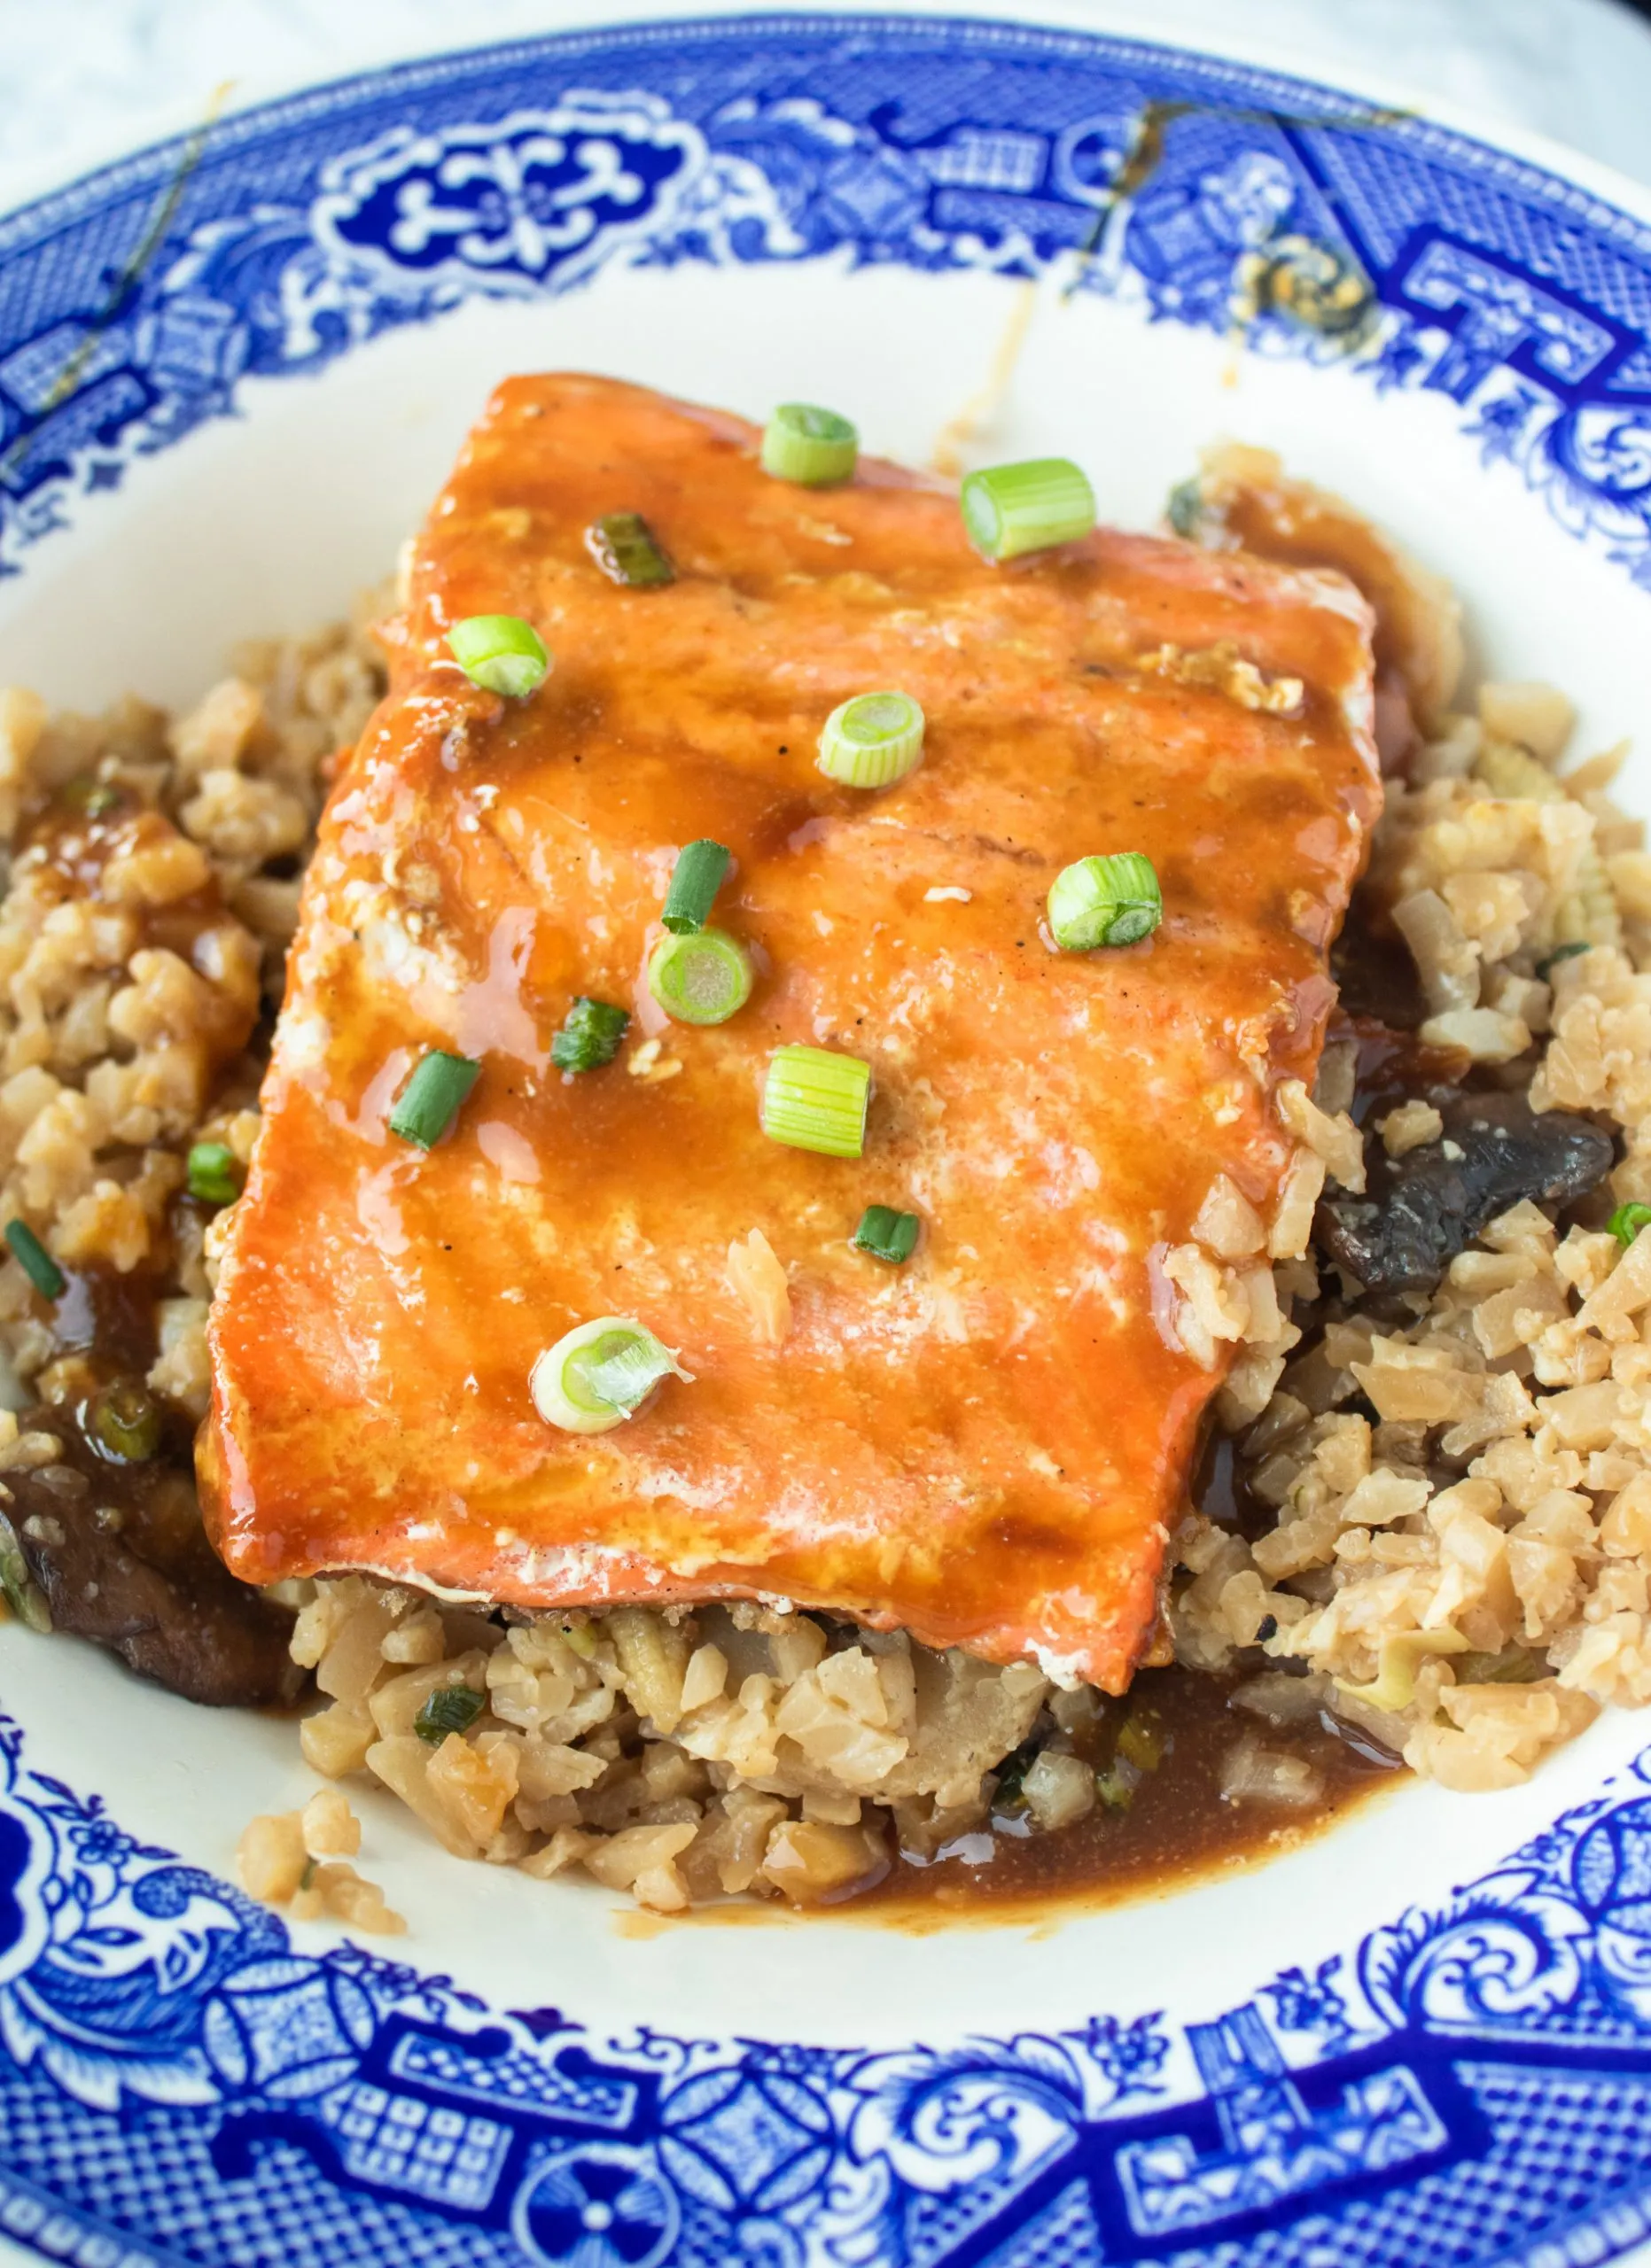 Teriyaki salmon is a one pot keto salmon recipe that is ready in just 15 minutes! Adaptable for paleo and gluten free lifestyles.